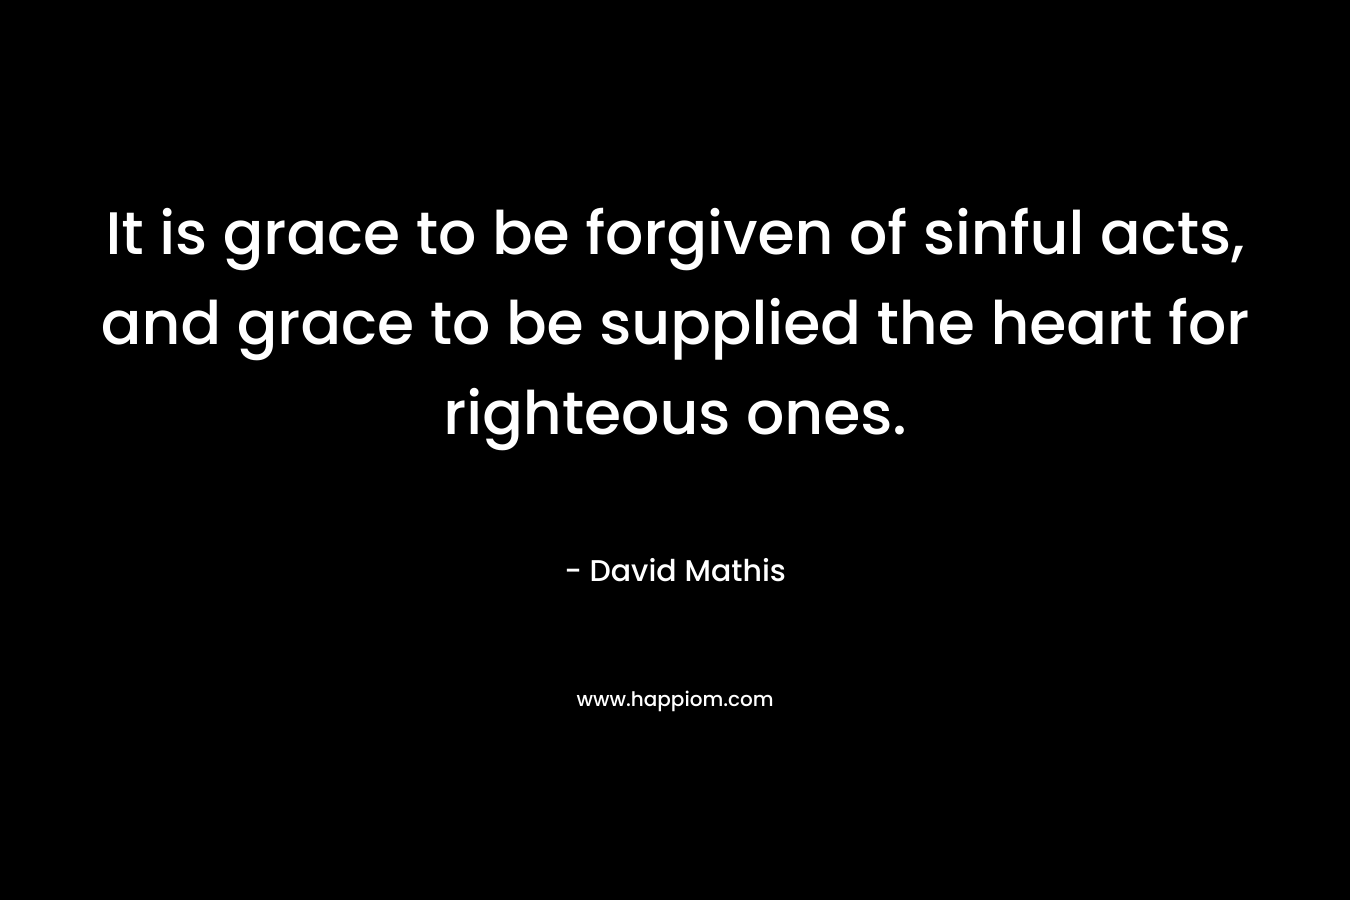 It is grace to be forgiven of sinful acts, and grace to be supplied the heart for righteous ones. – David Mathis